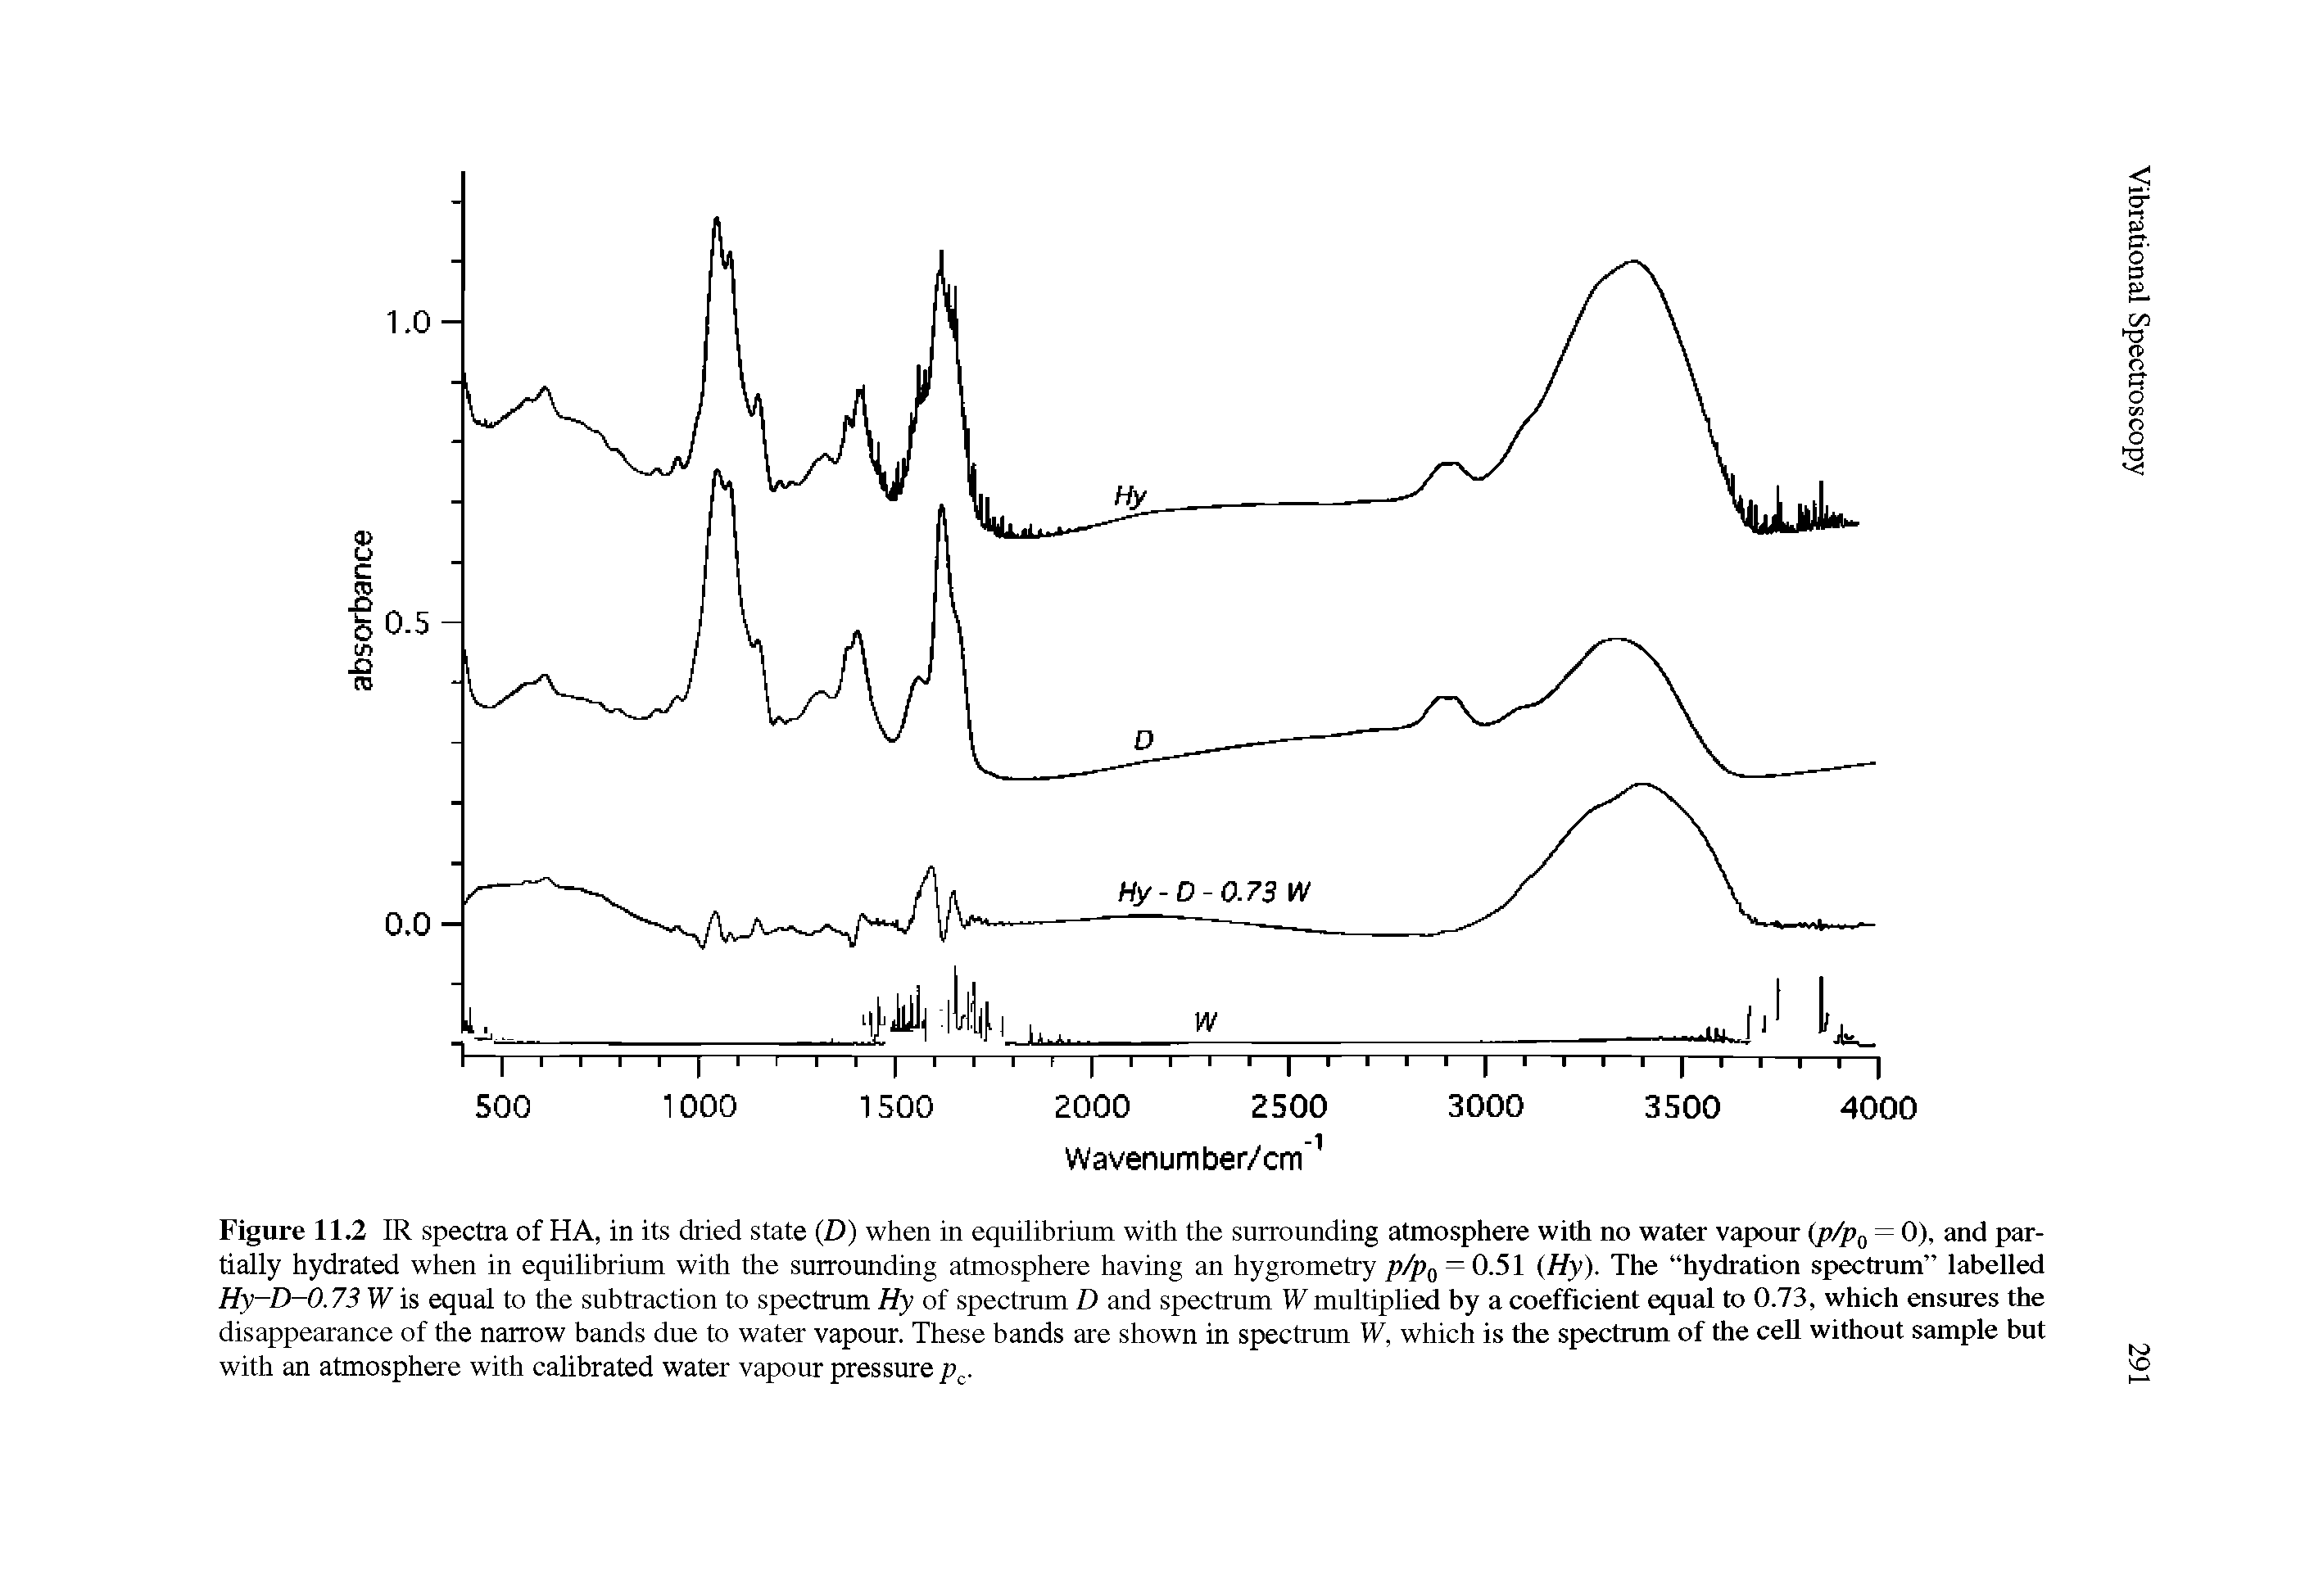 Figure 11.2 IR spectra of HA, in its dried state (D) when in equilibrium with the surrounding atmosphere with no water vapour (p/pQ = 0), and partially hydrated when in equilibrium with the surrounding atmosphere having an hygrometry p/pQ = 0.51 (Hy). The hydration spectrum" labelled Hy-D-0.73 W is equal to the subtraction to spectrum Hy of spectrum D and spectrum Wmultiplied by a coefficient equal to 0.73, which ensures the disappearance of the narrow bands due to water vapour. These bands are shown in spectrum W, which is the spectrum of the cell without sample but with an atmosphere with calibrated water vapour pressure p. ...